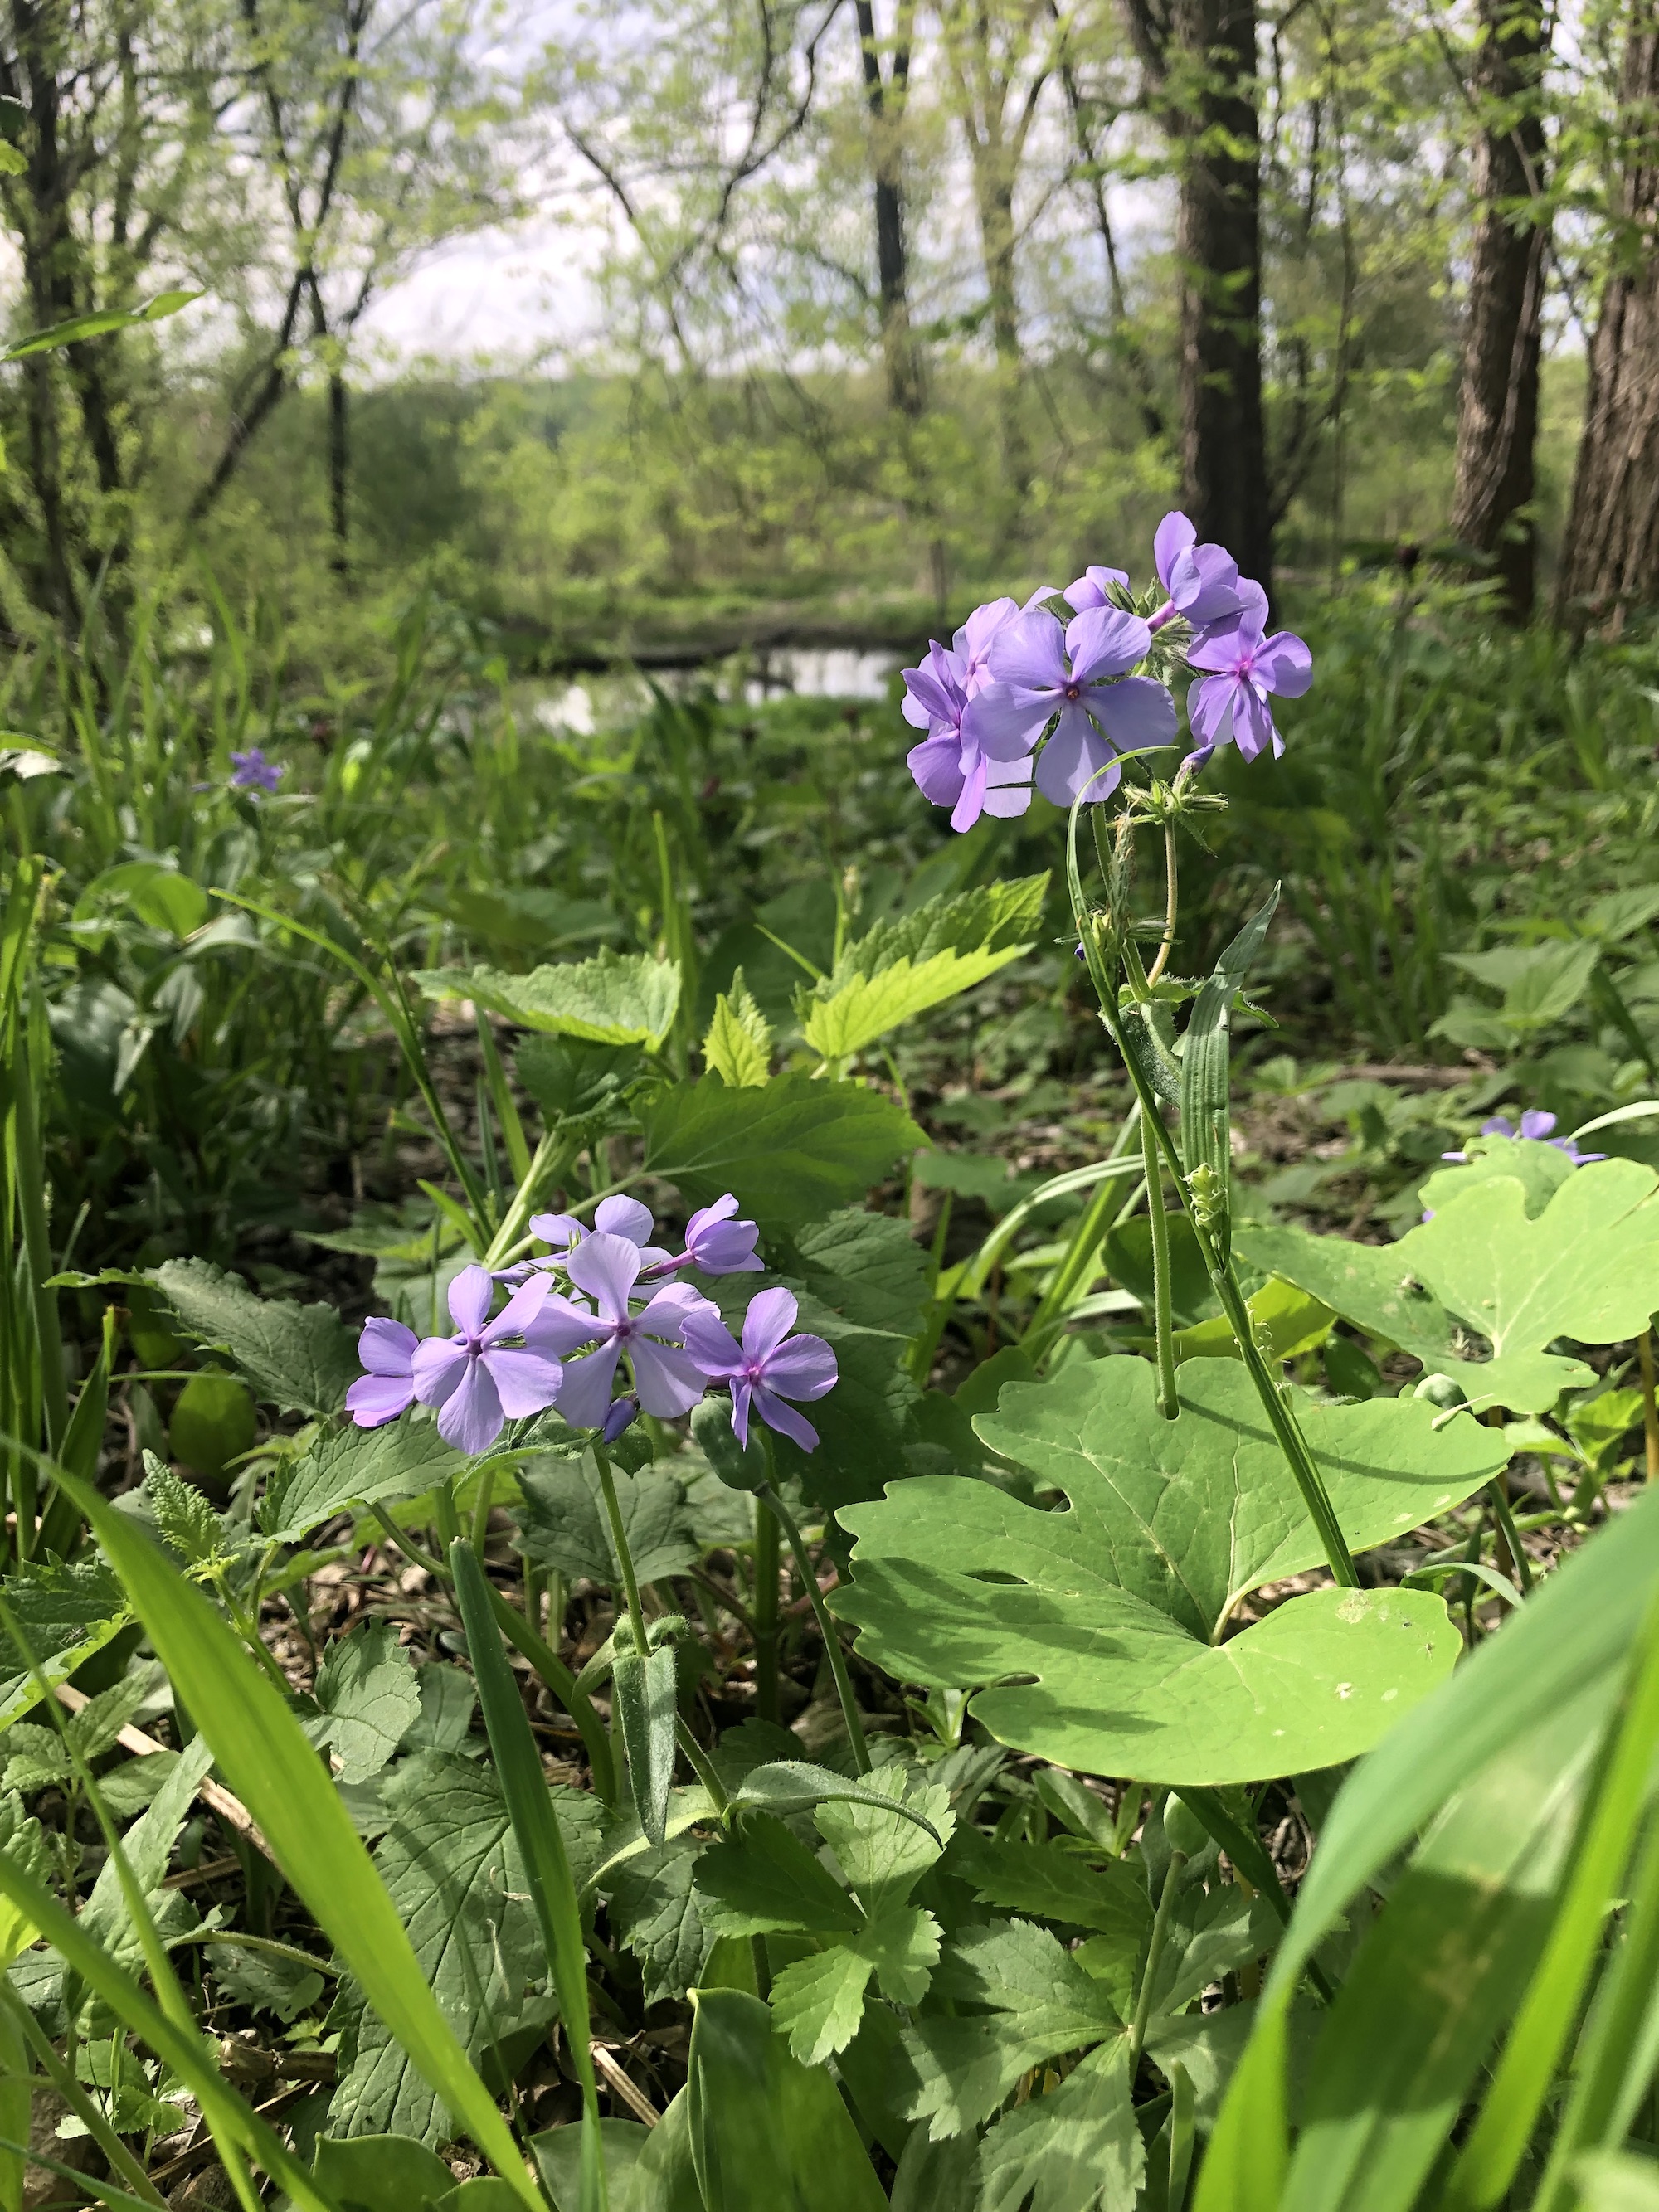 Woodland Phlox by Council Ring in Oak Savanna in Madison, Wisconsin  on May 15, 2022.